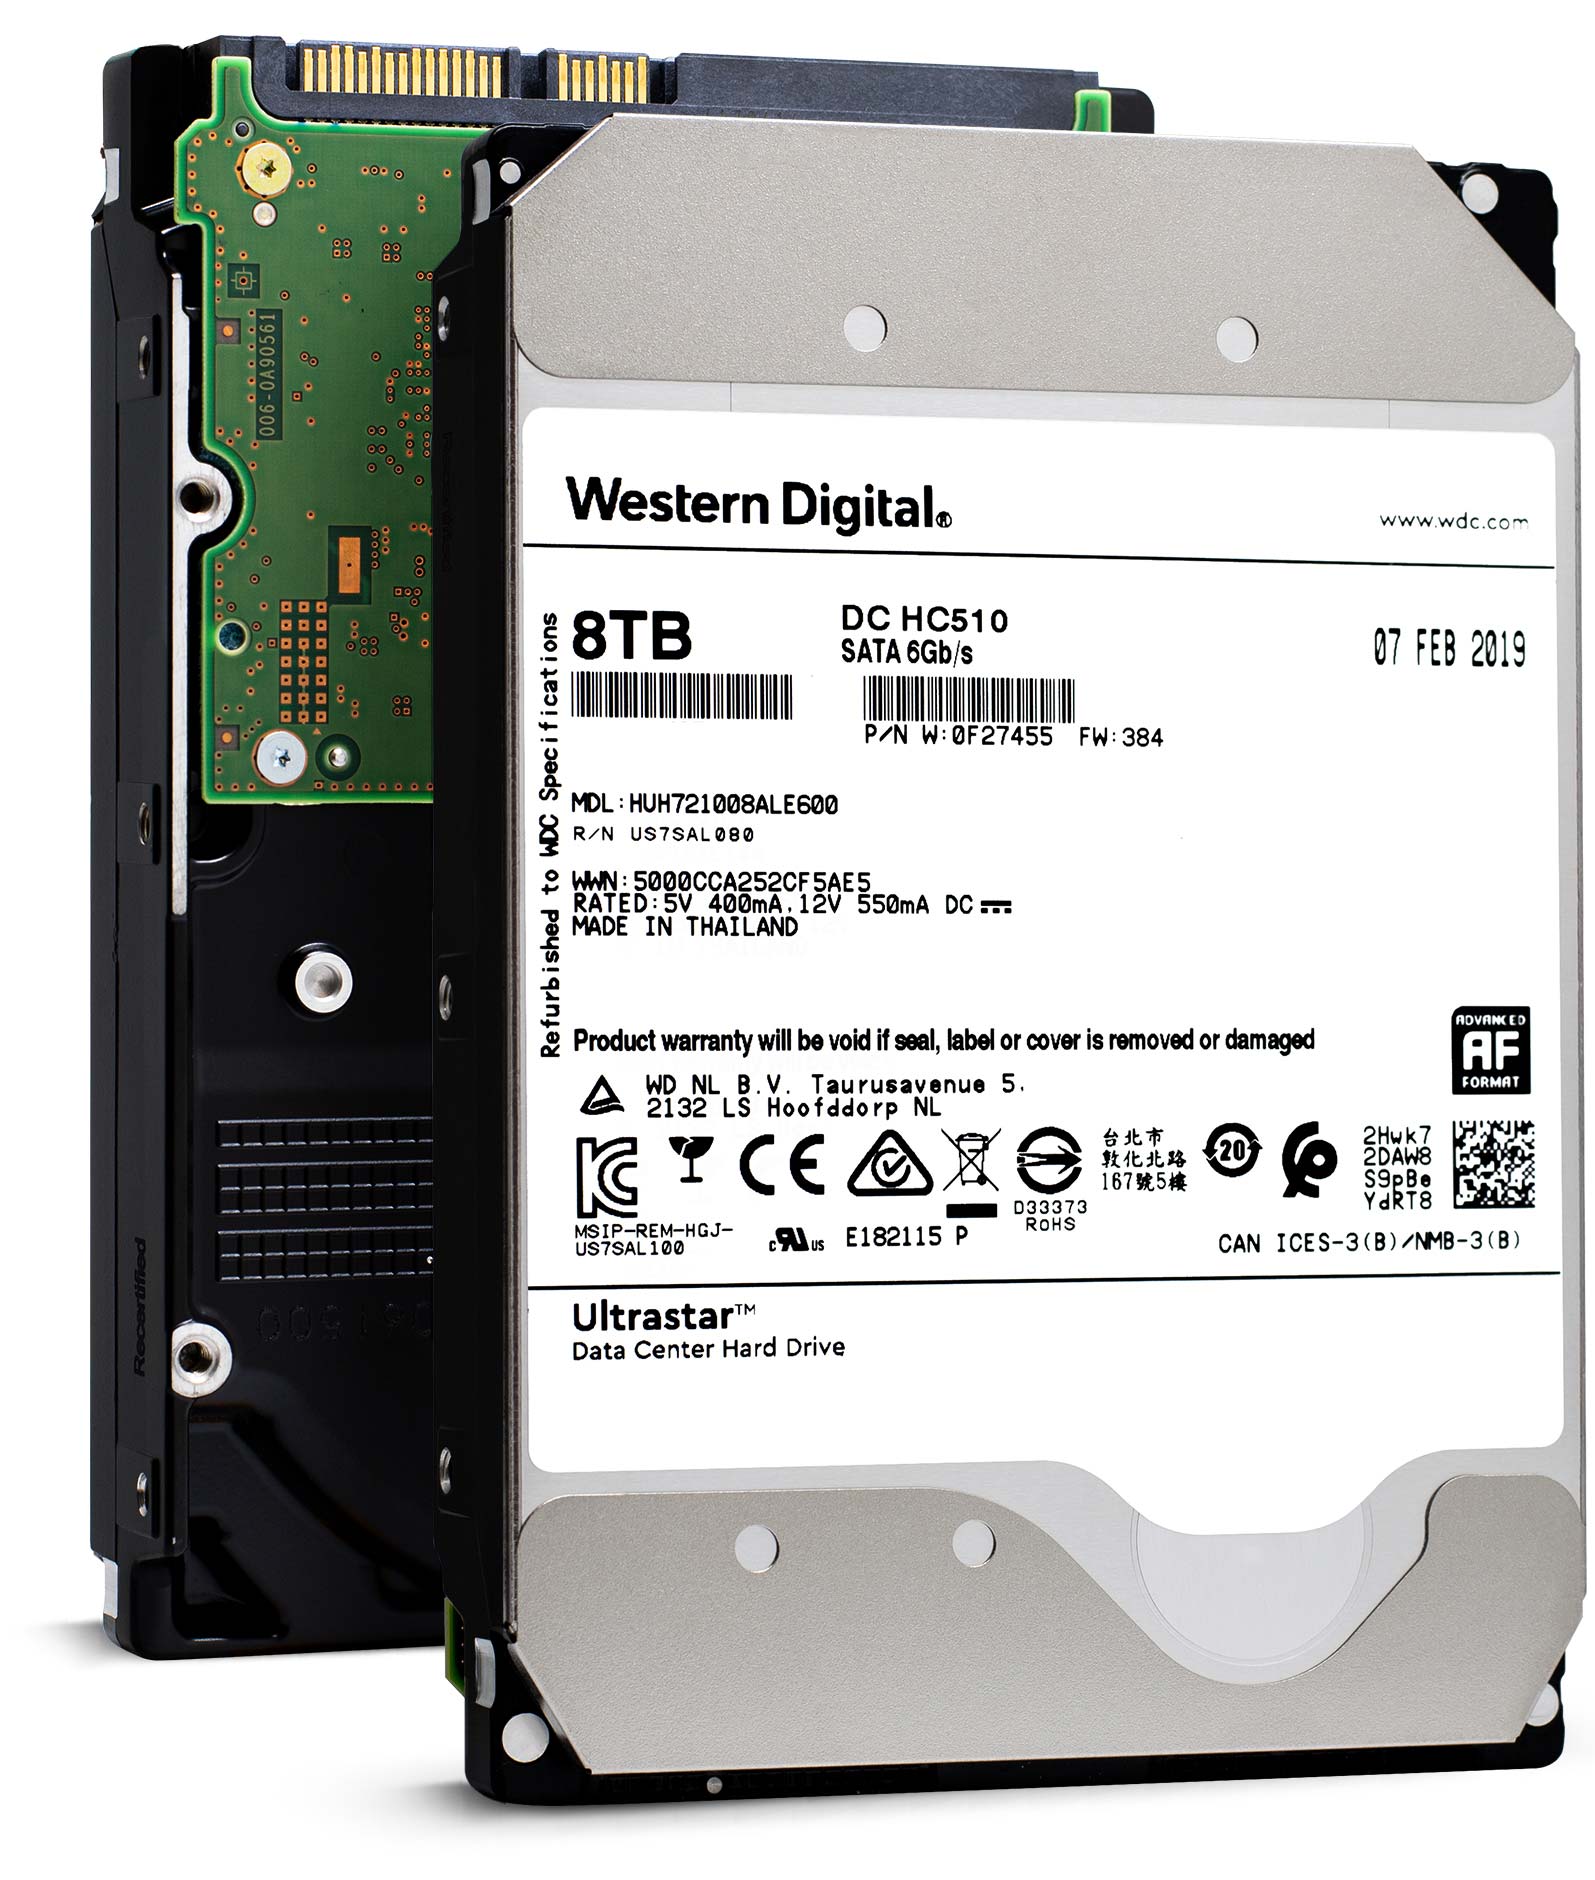 WD Ultrastar DC HC510 0F27455 HUH721008ALE600 8TB 7.2K RPM SATA 6Gb/s 512e 256MB Cache 3.5" ISE Power Disable Pin Manufacturer Recertified HDD